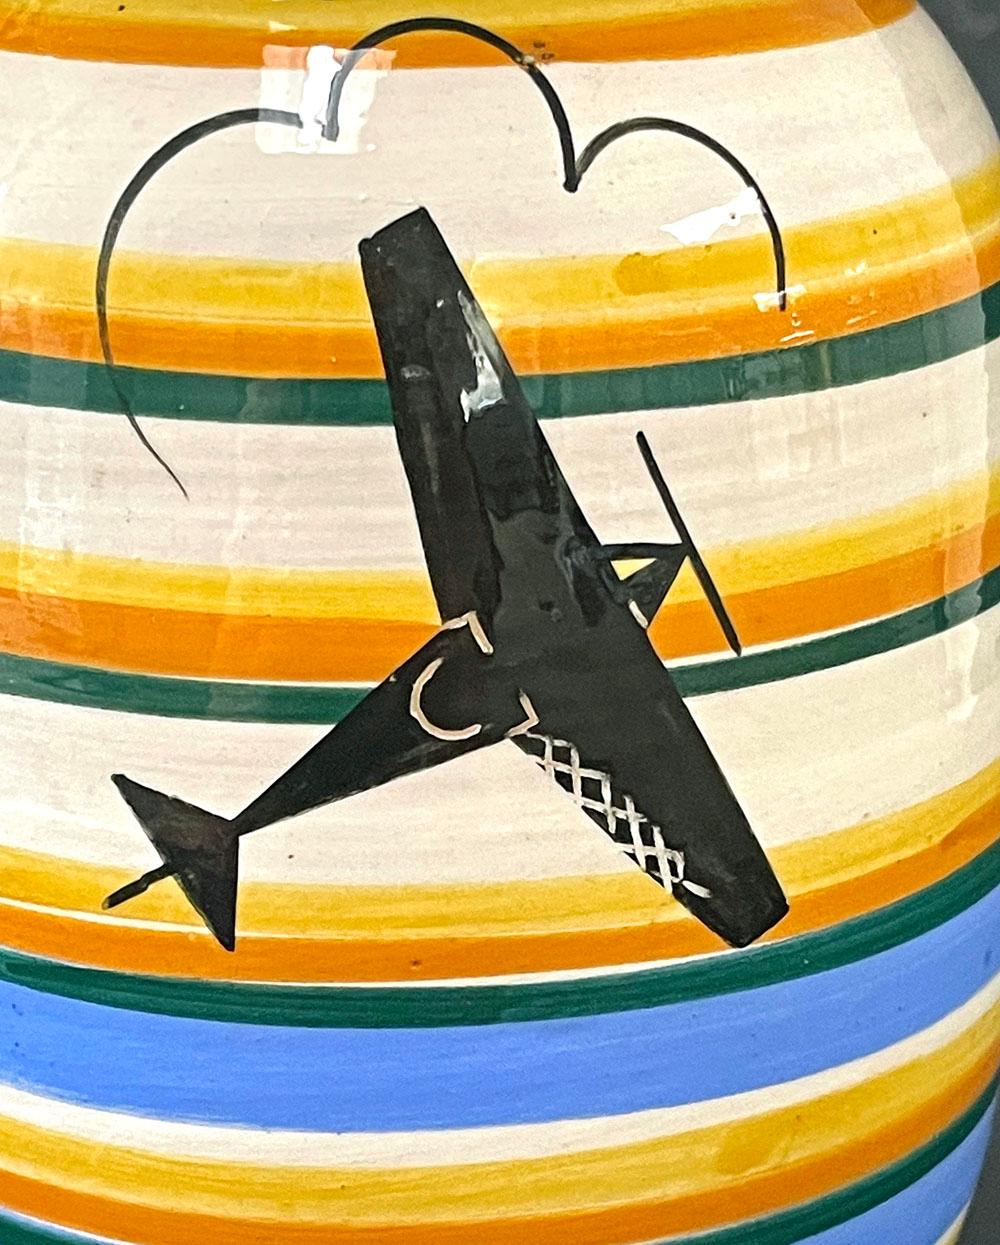 A very fine and rare example of Italian decorative arts in the Futurist mold, celebrating aeronautics, speed and modern technology, this vase was made by the famed Rometti ceramic works in Umbertide, Italy, not long after it was founded in 1927.